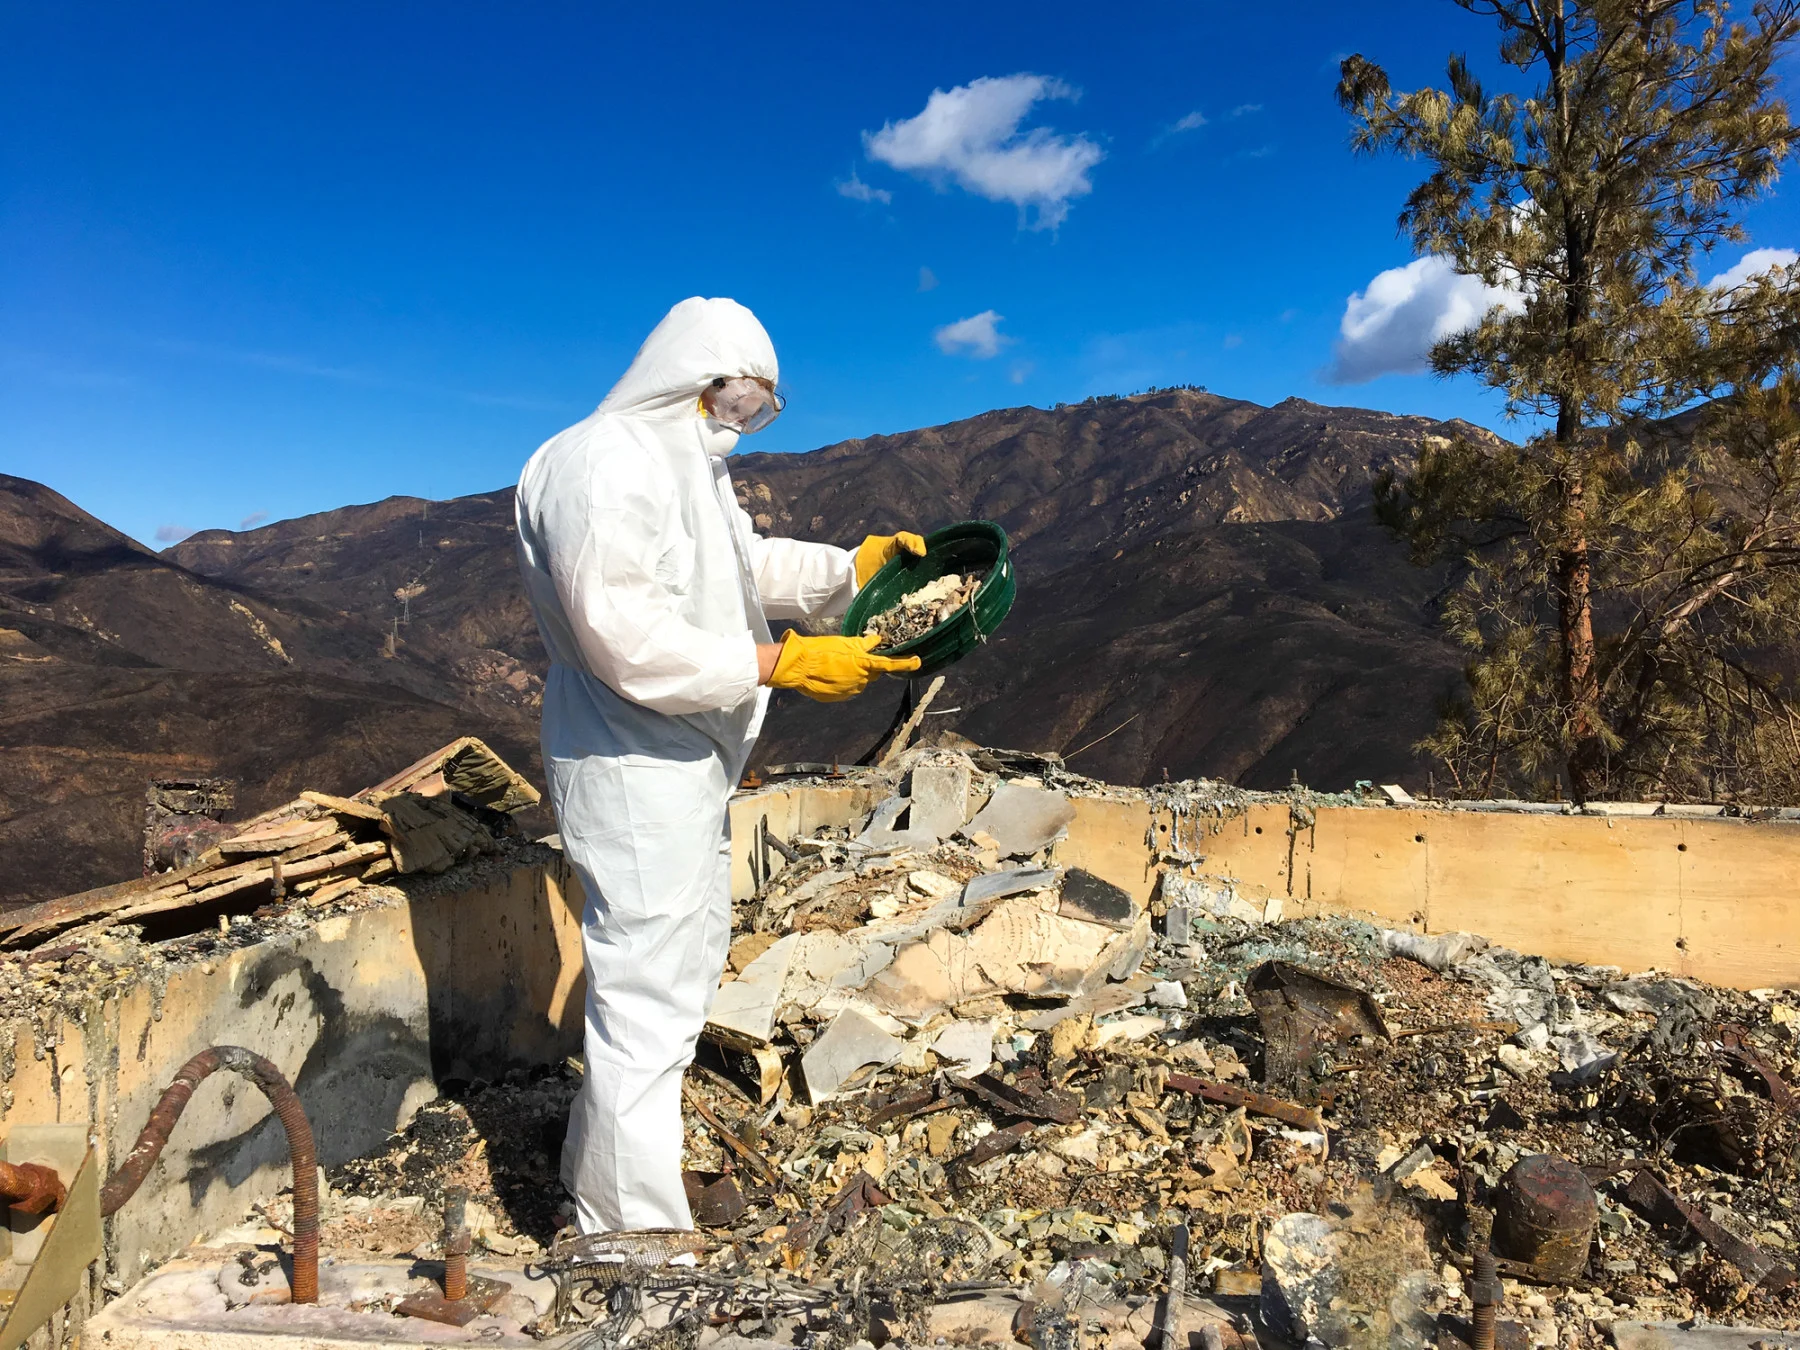 A man in hazmat suit sifts through ash and toxic waste after the Woolsey wildfire (2018) in Malibu, CA, USA.(JannHuizenga/ E+/ Getty Images)